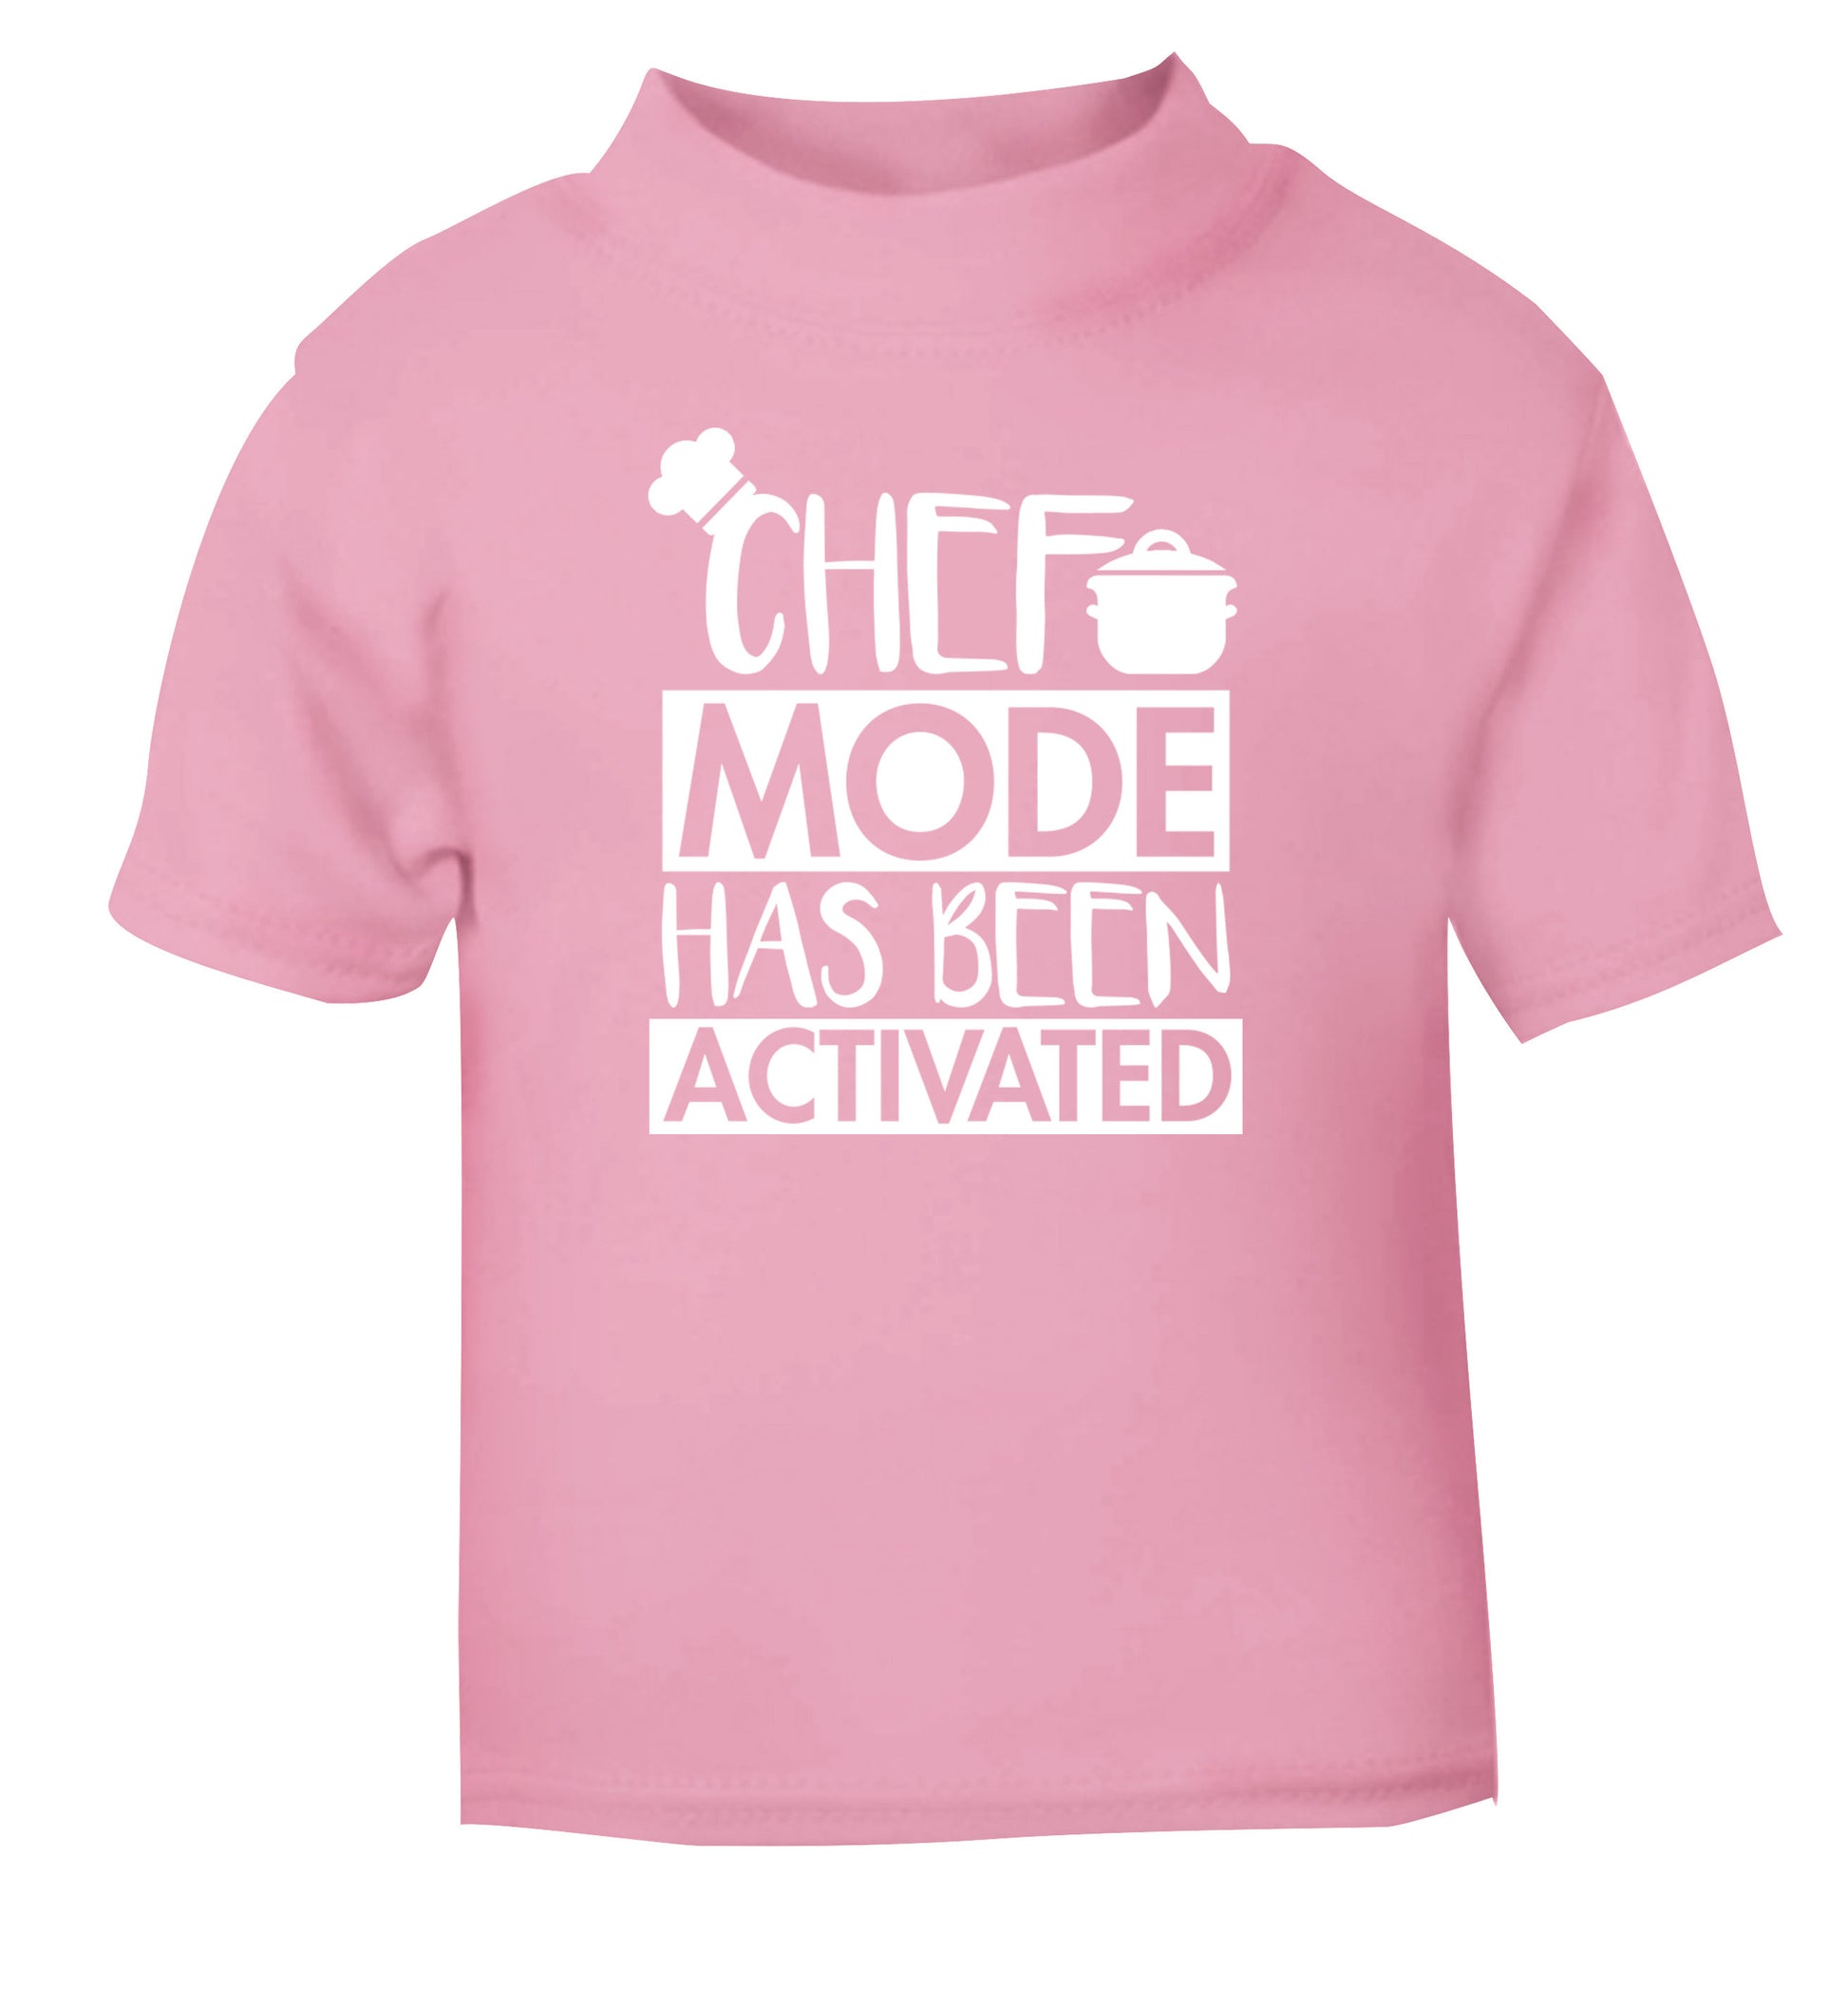 Chef mode has been activated light pink Baby Toddler Tshirt 2 Years